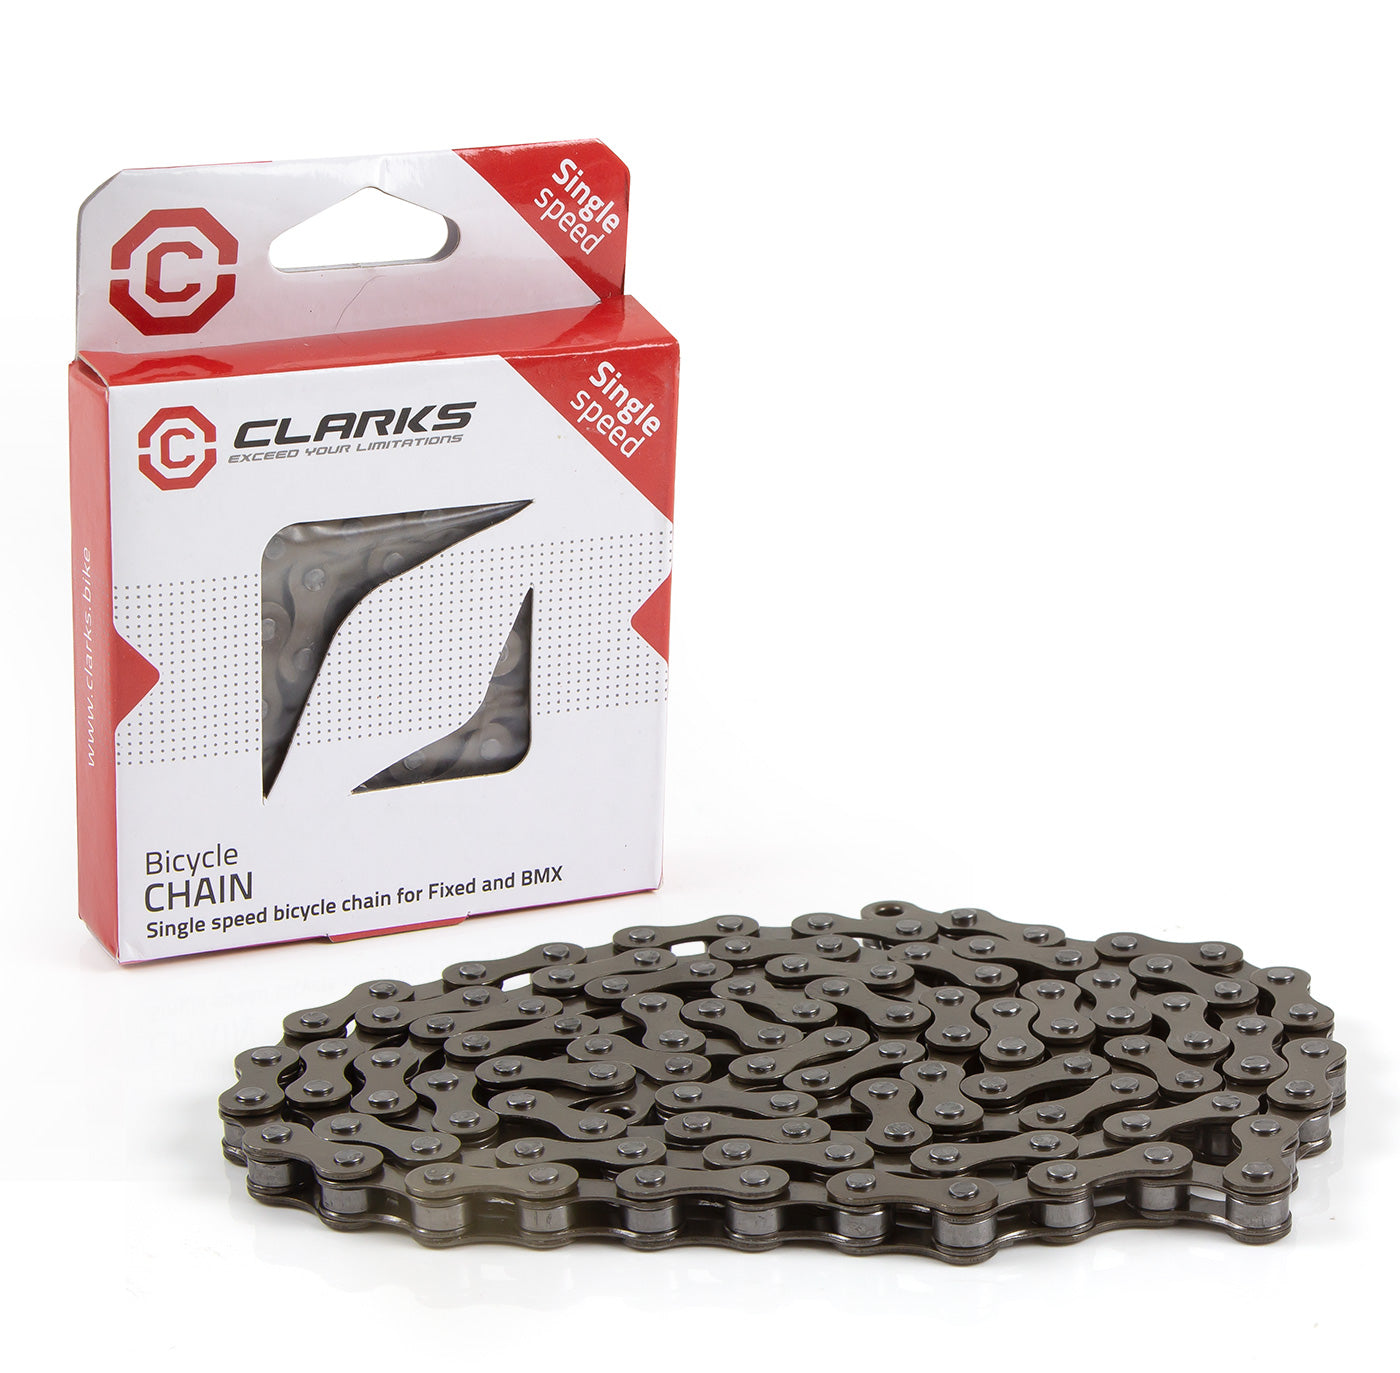 View Clarks Bike chain singles speed 5 6 7 8 9 10 11 speed all gear systems Single information